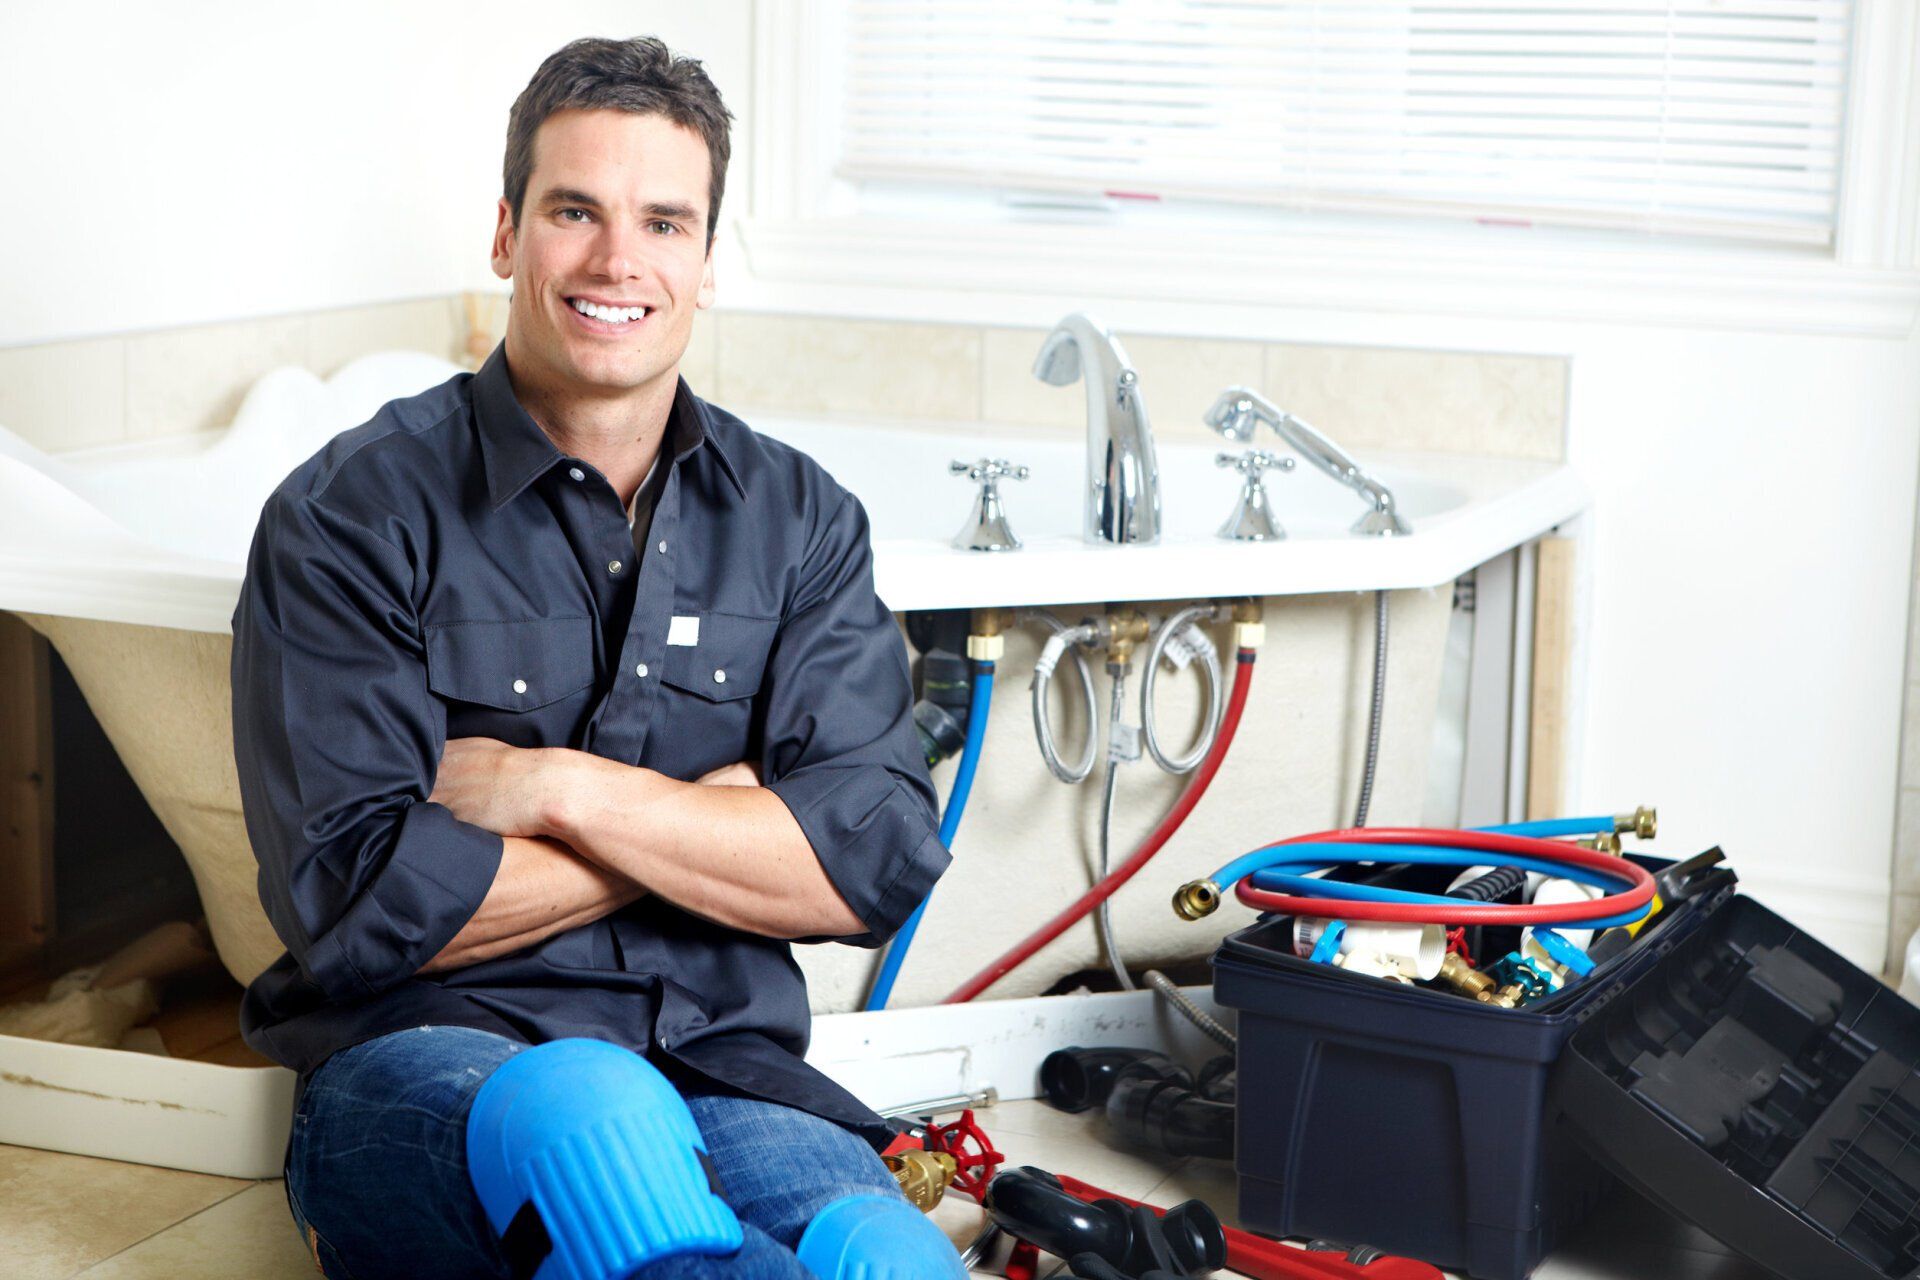 5 Things to Consider Before Hiring a Plumbing Contractor